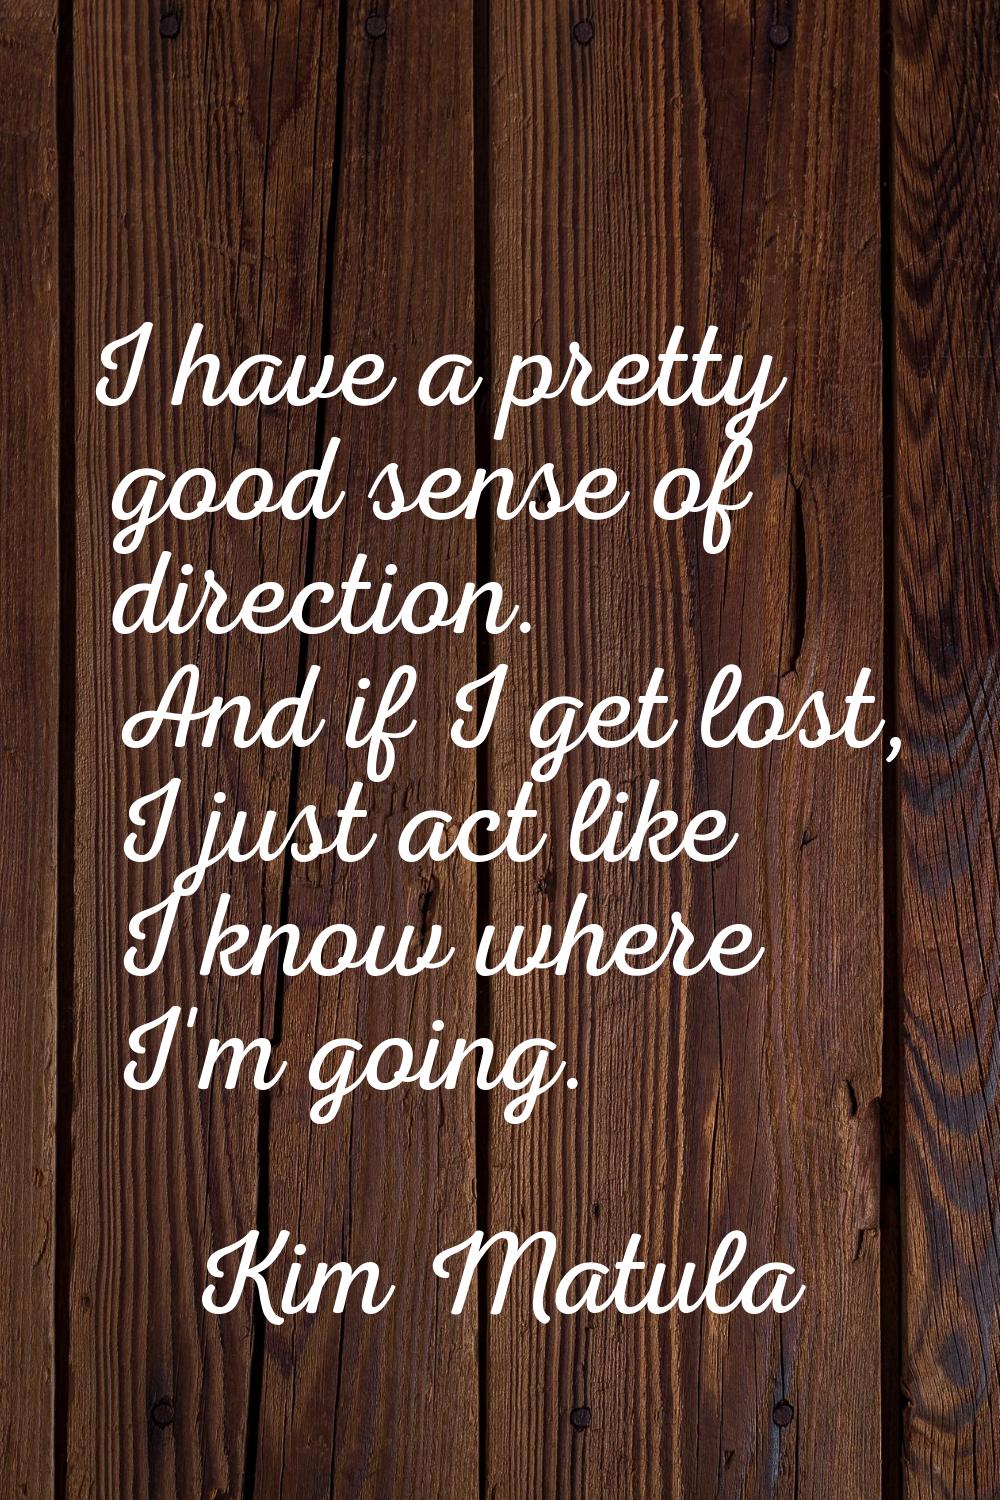 I have a pretty good sense of direction. And if I get lost, I just act like I know where I'm going.